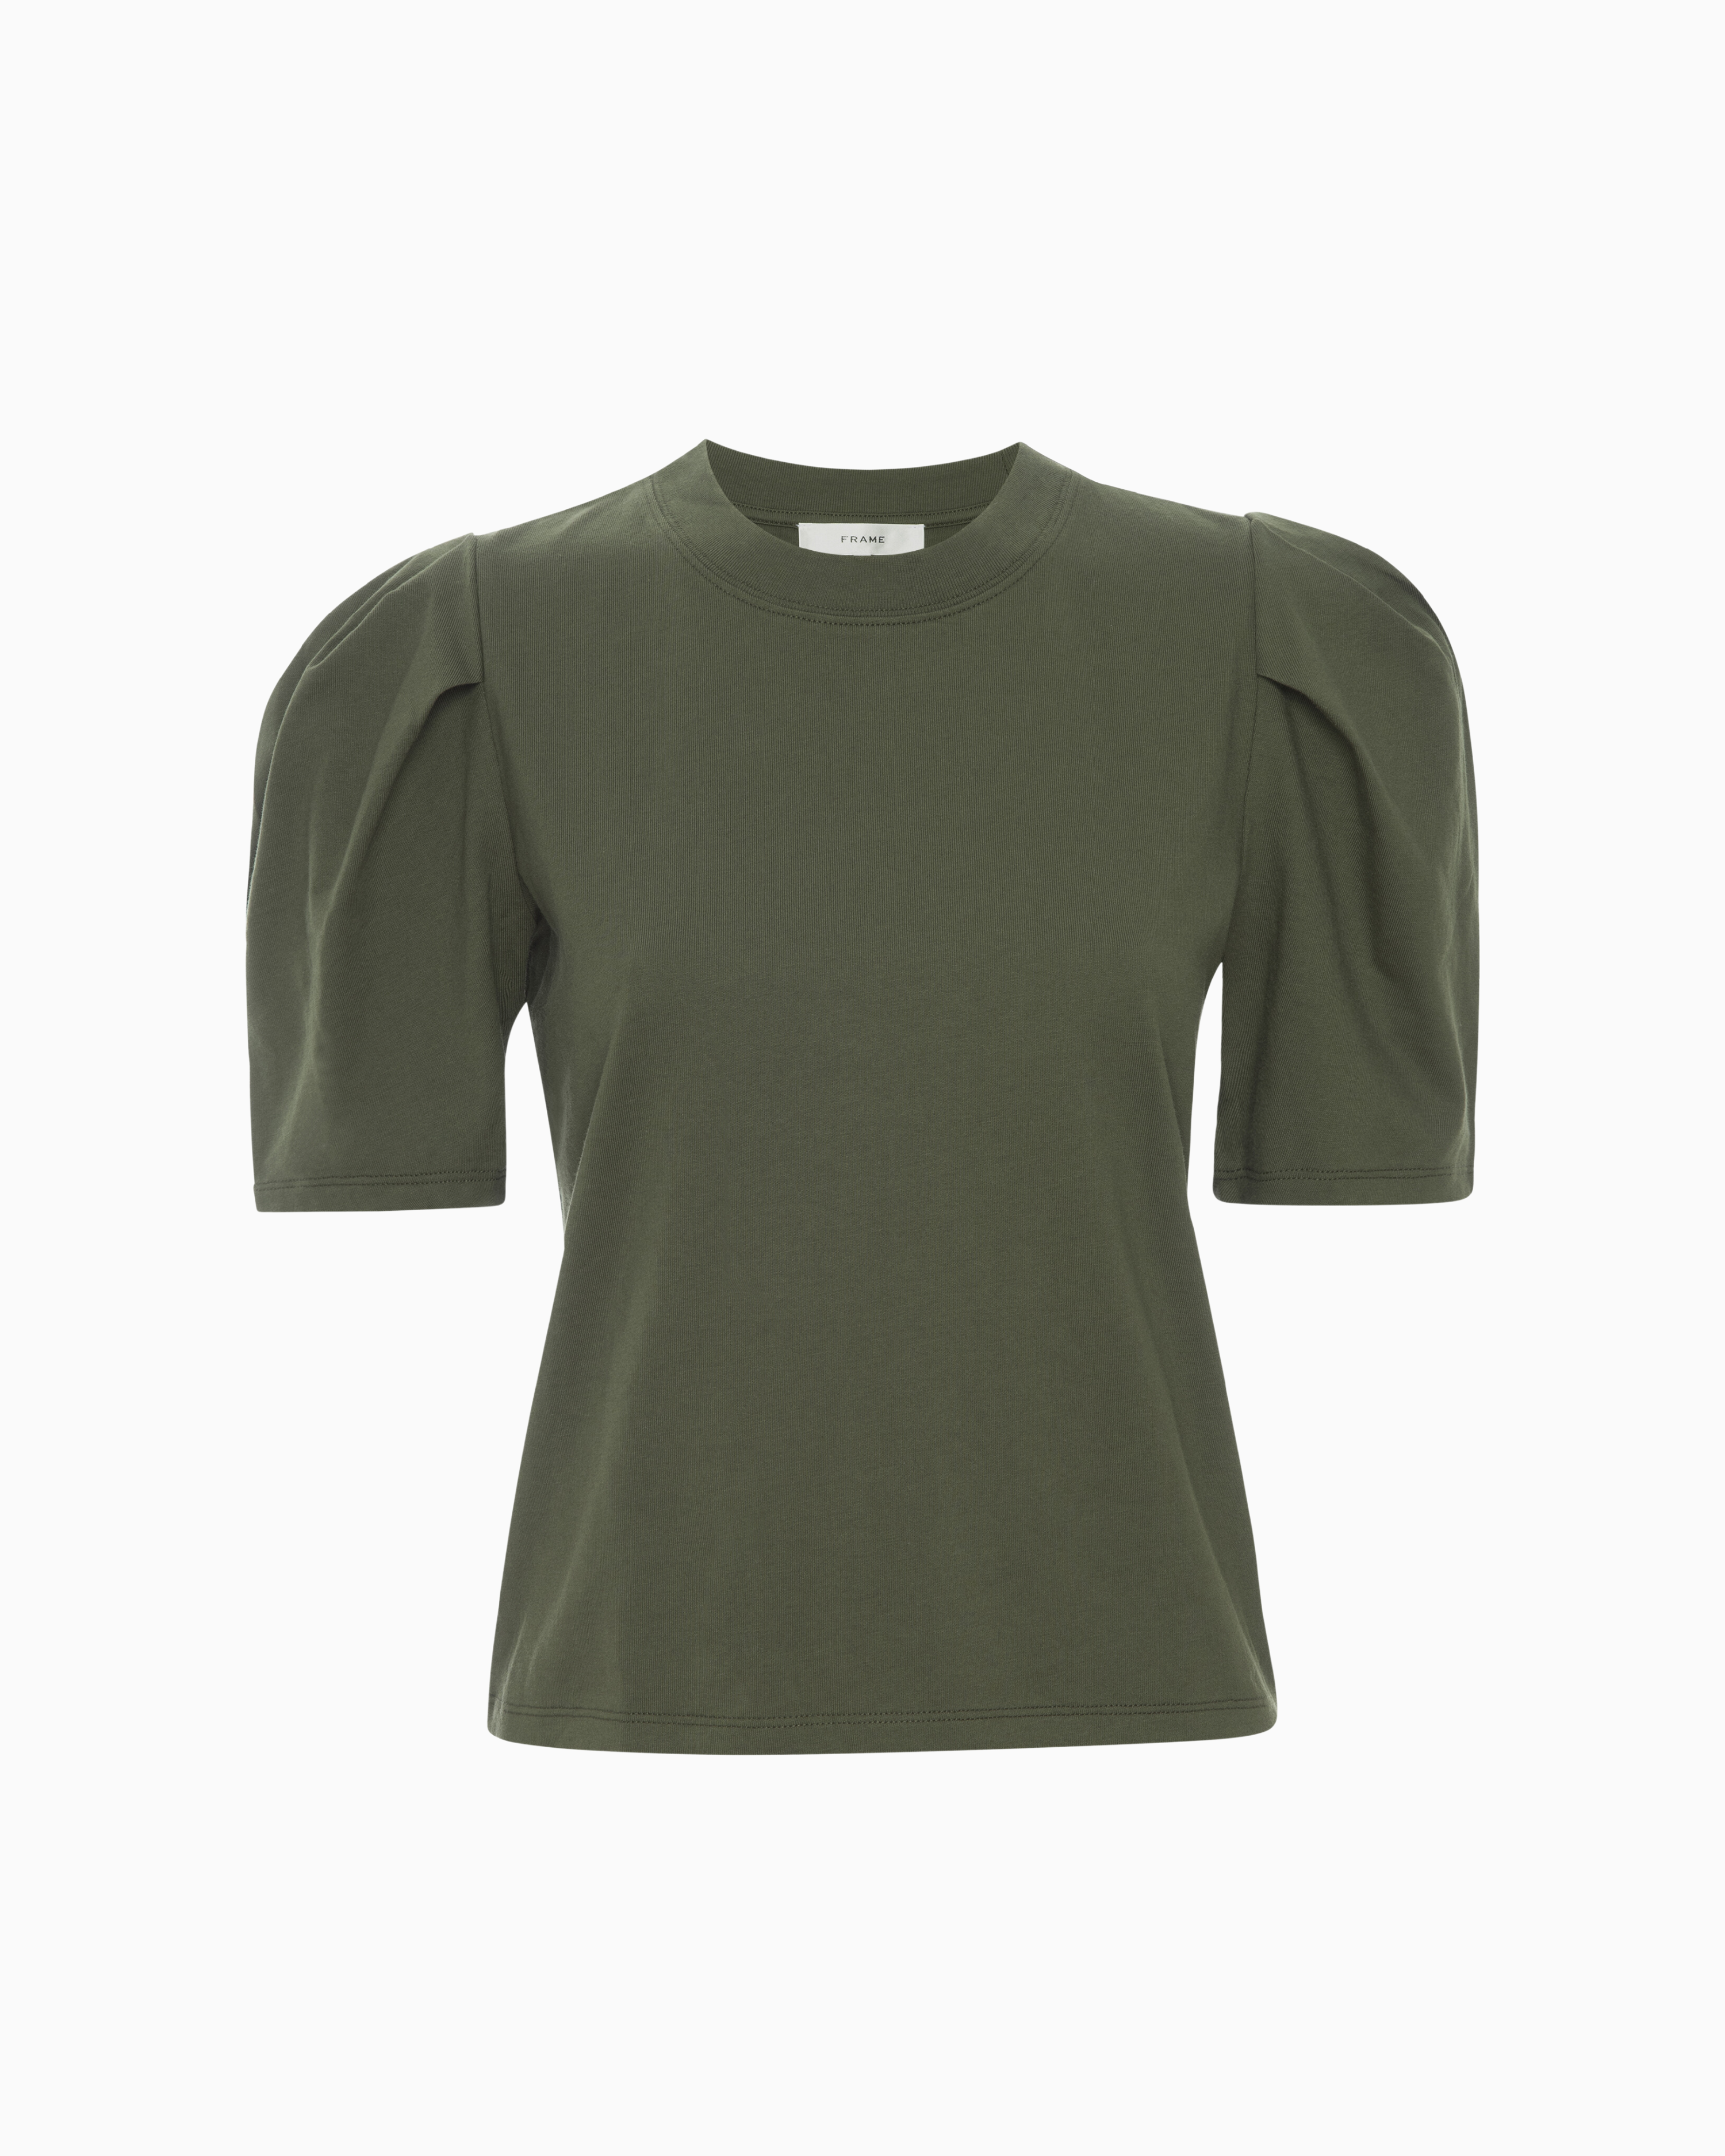 Frame Draped Femme Tee in Fatigue